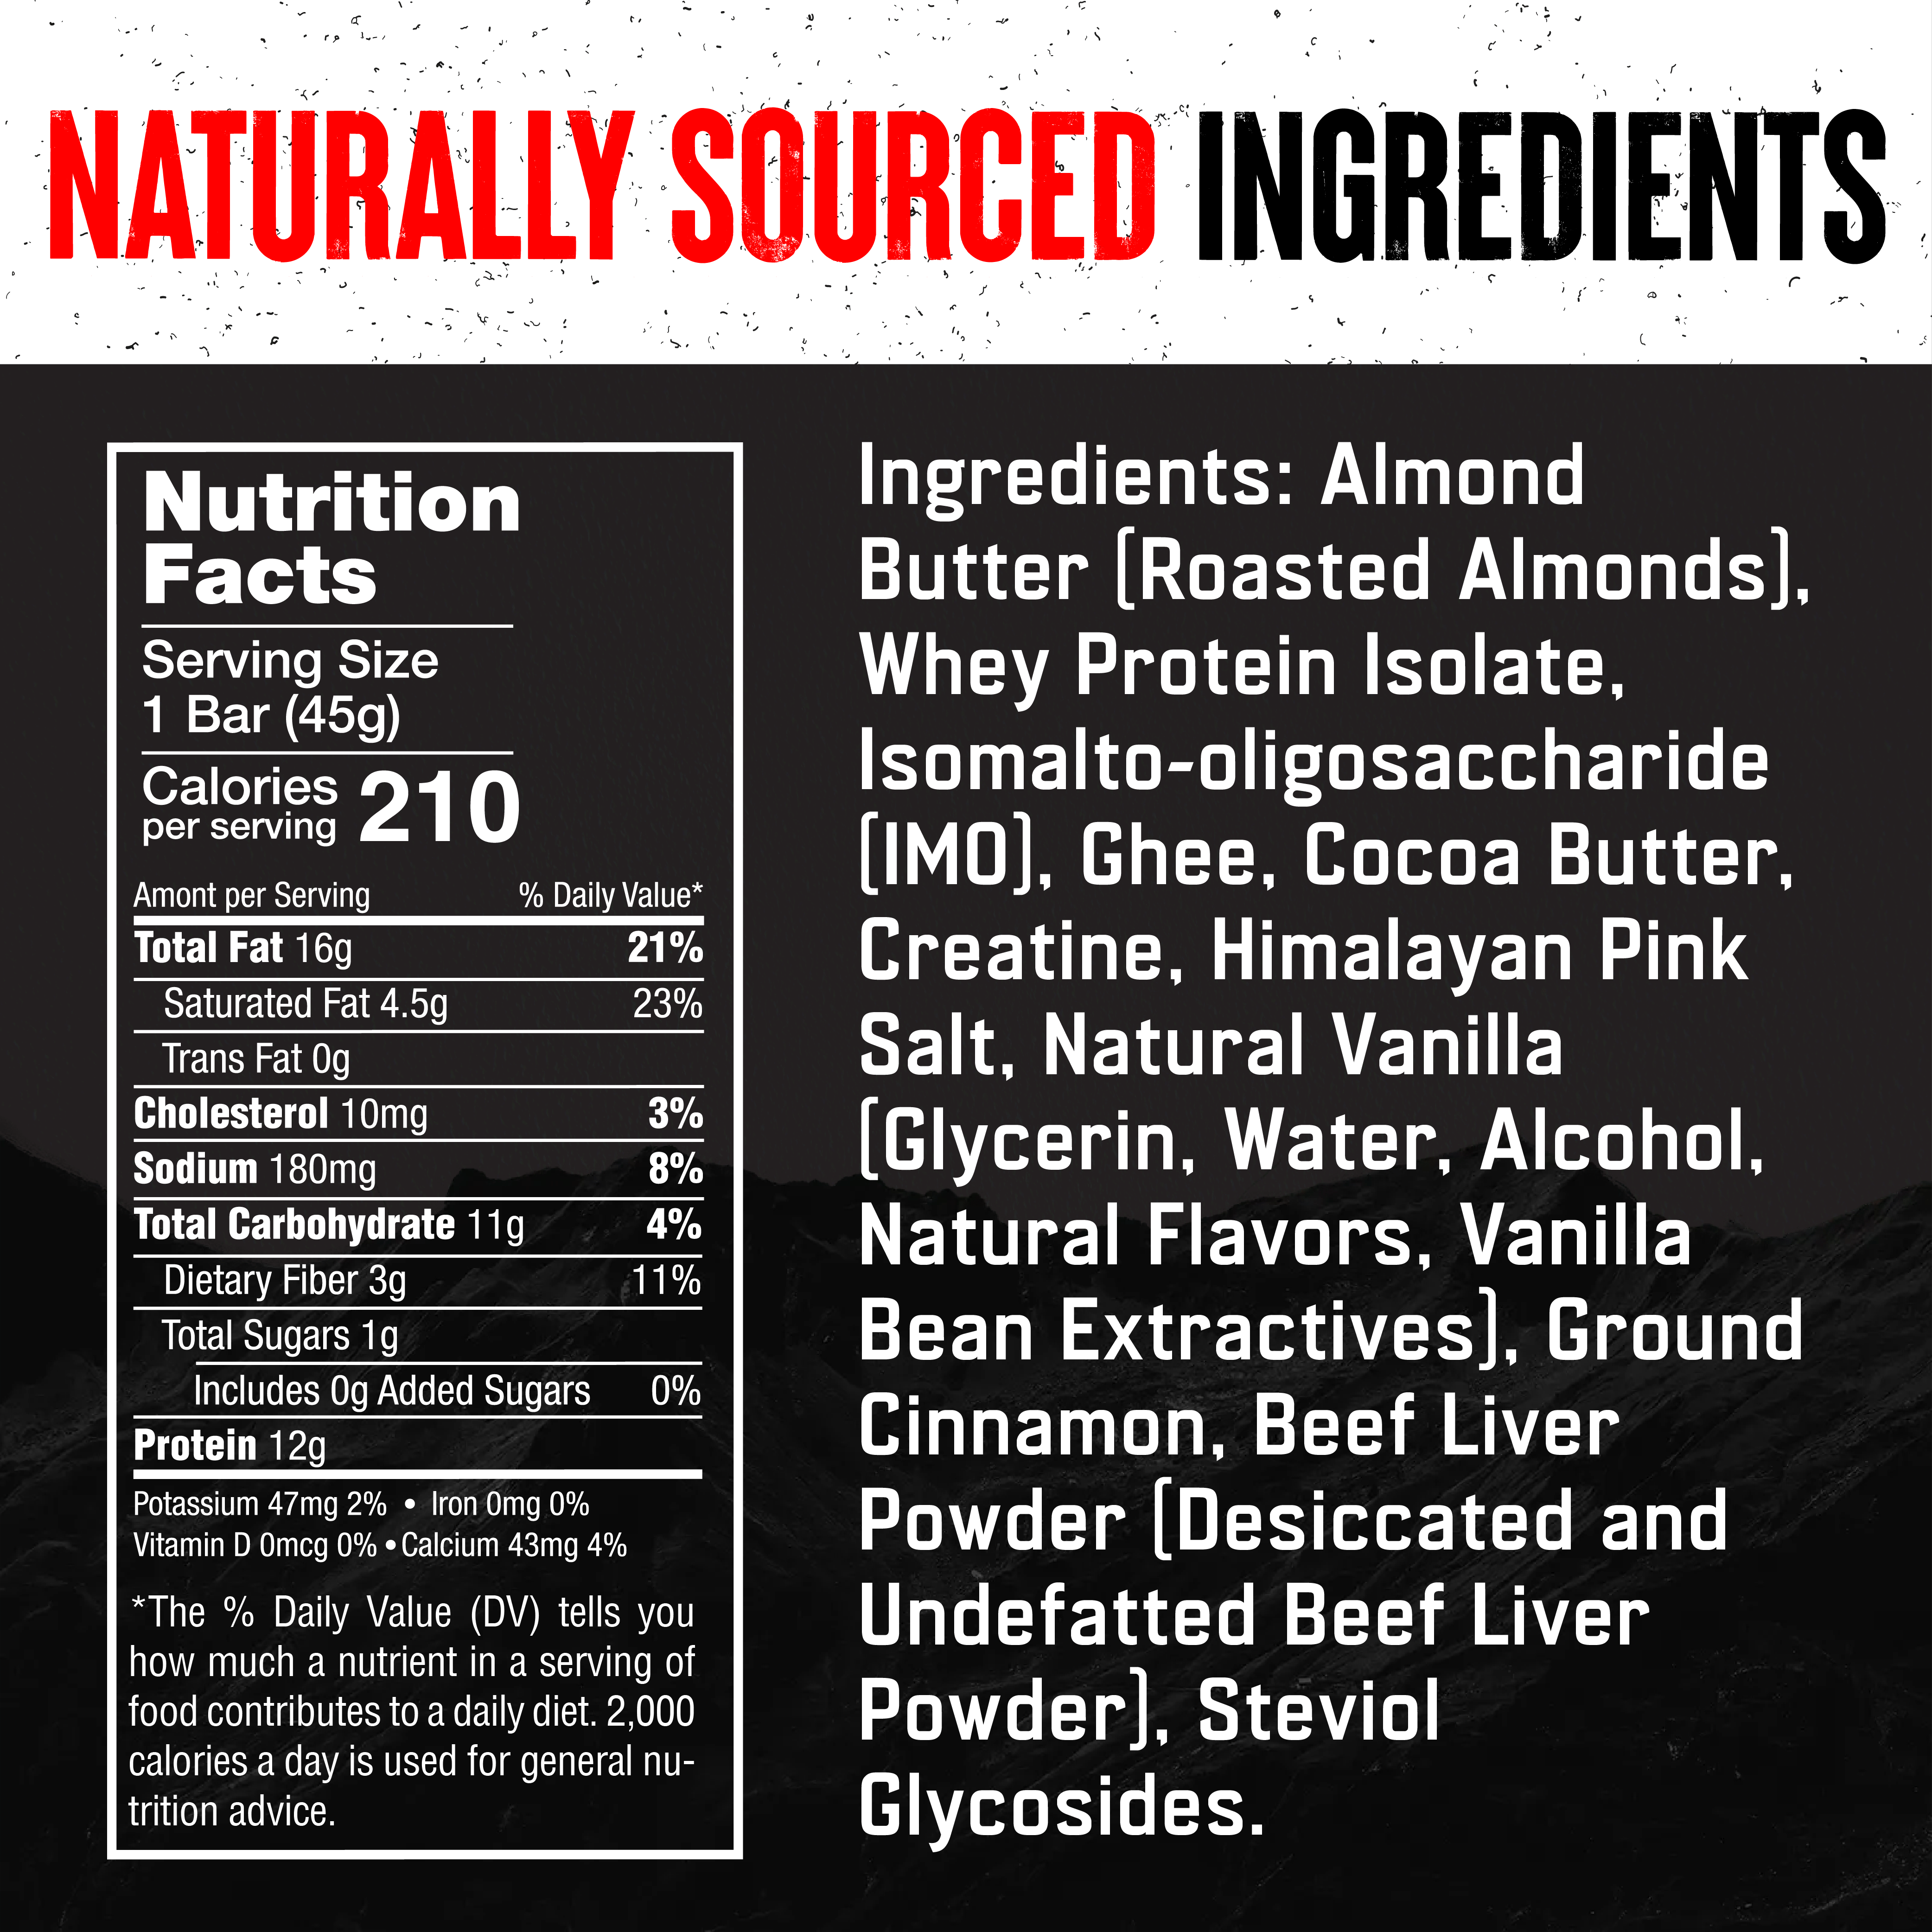 Graphic of ingredients and nutrition facts panel in the Liver King Bar